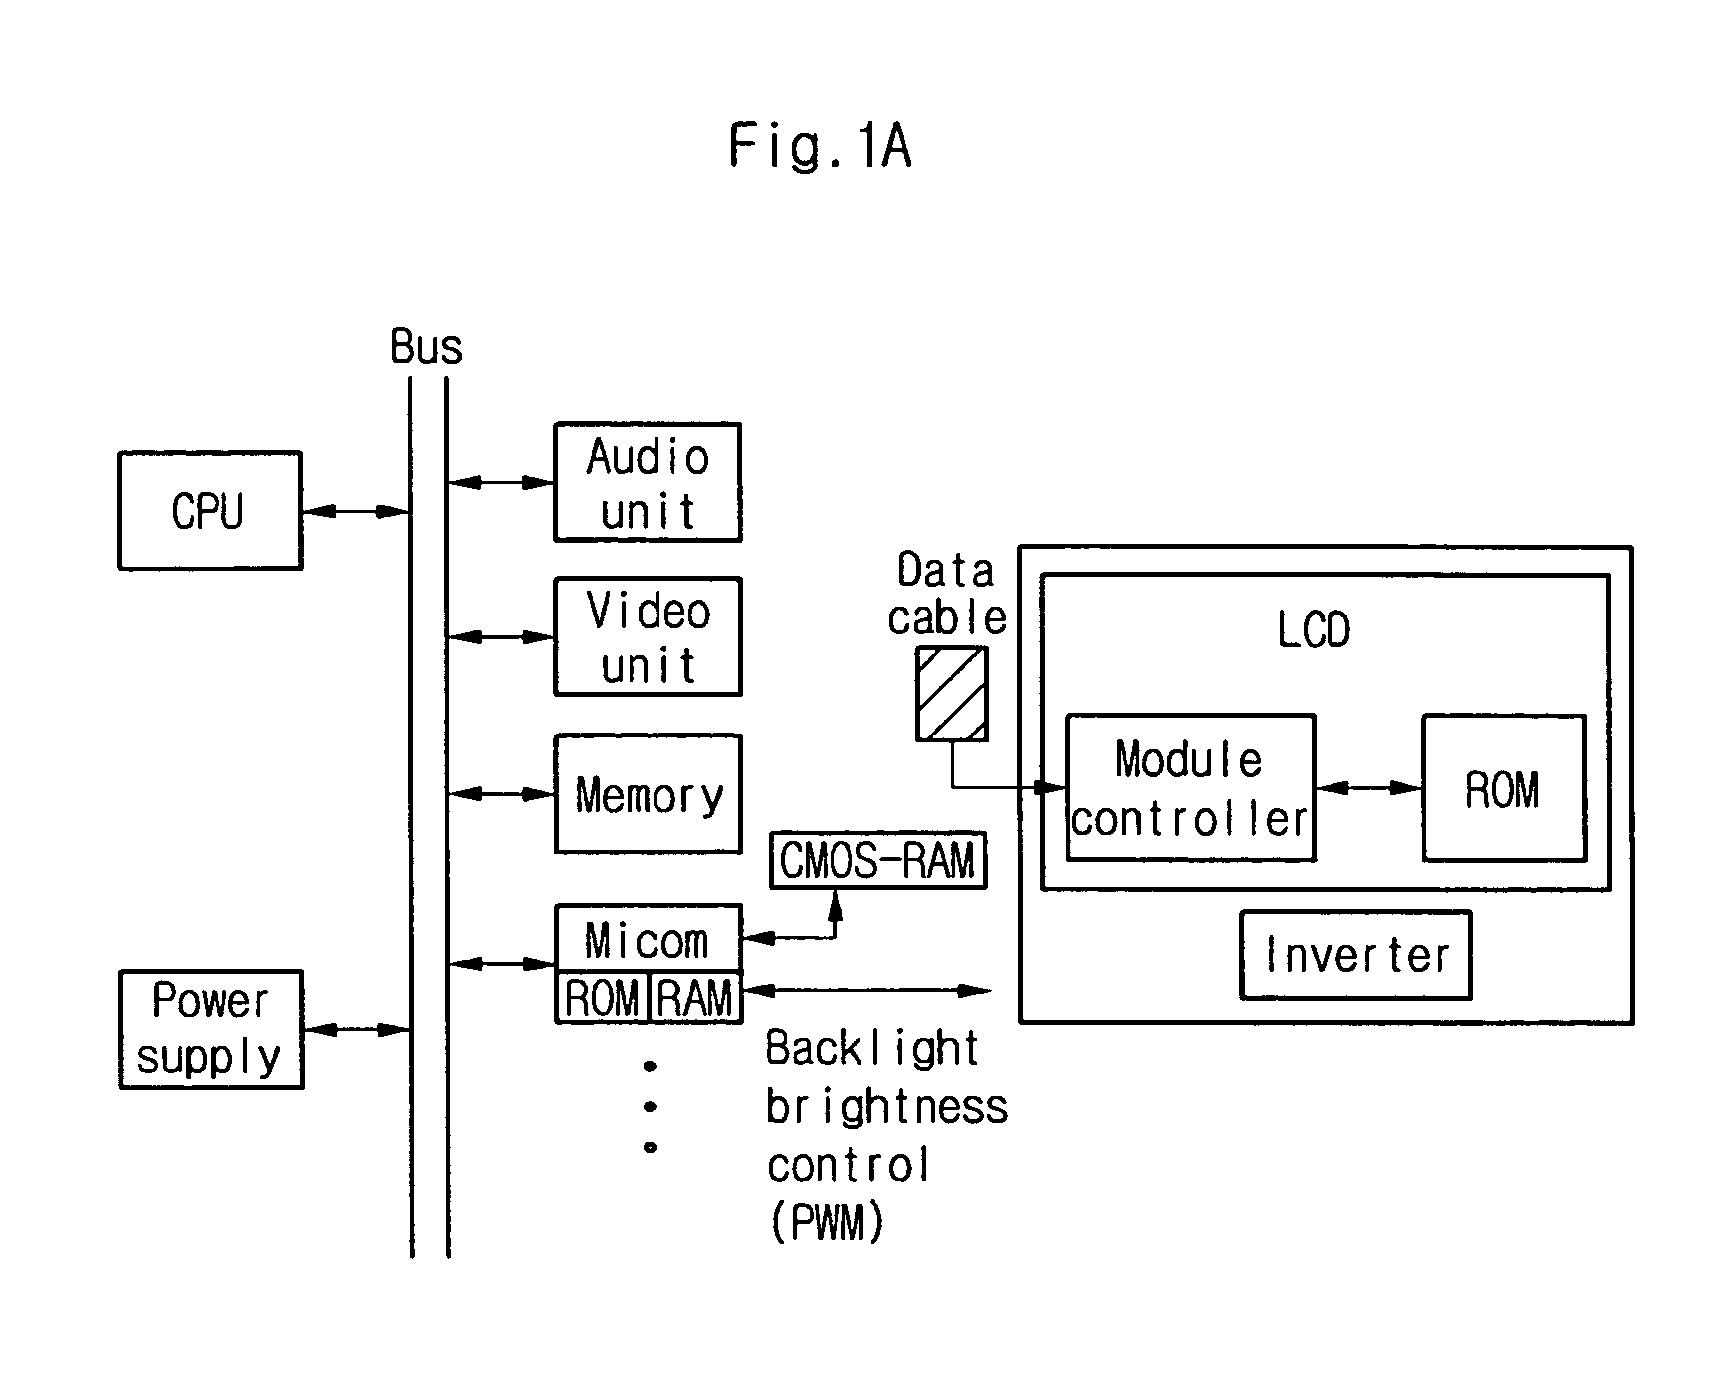 Apparatus and method for controlling operation of audio low sound output means